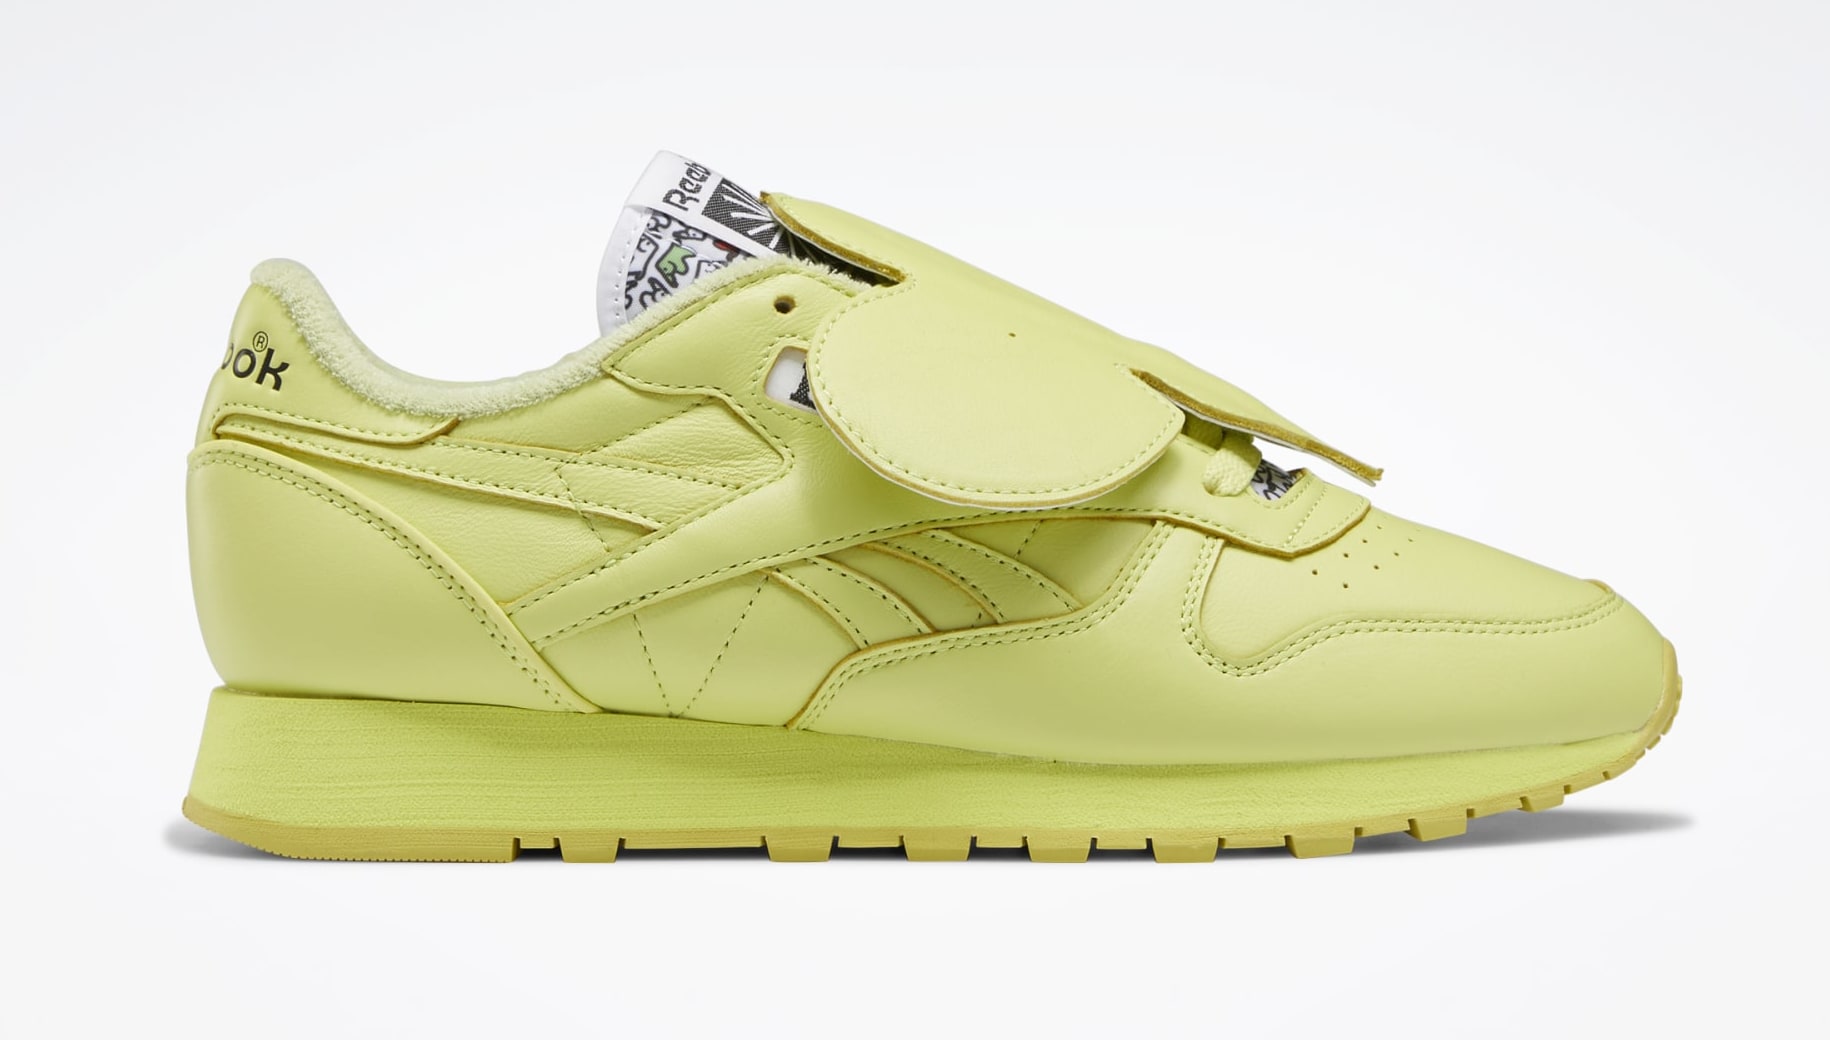 Eames x Reebok Classic Leather &#x27;Yellow Elephant&#x27; GY6386 Lateral